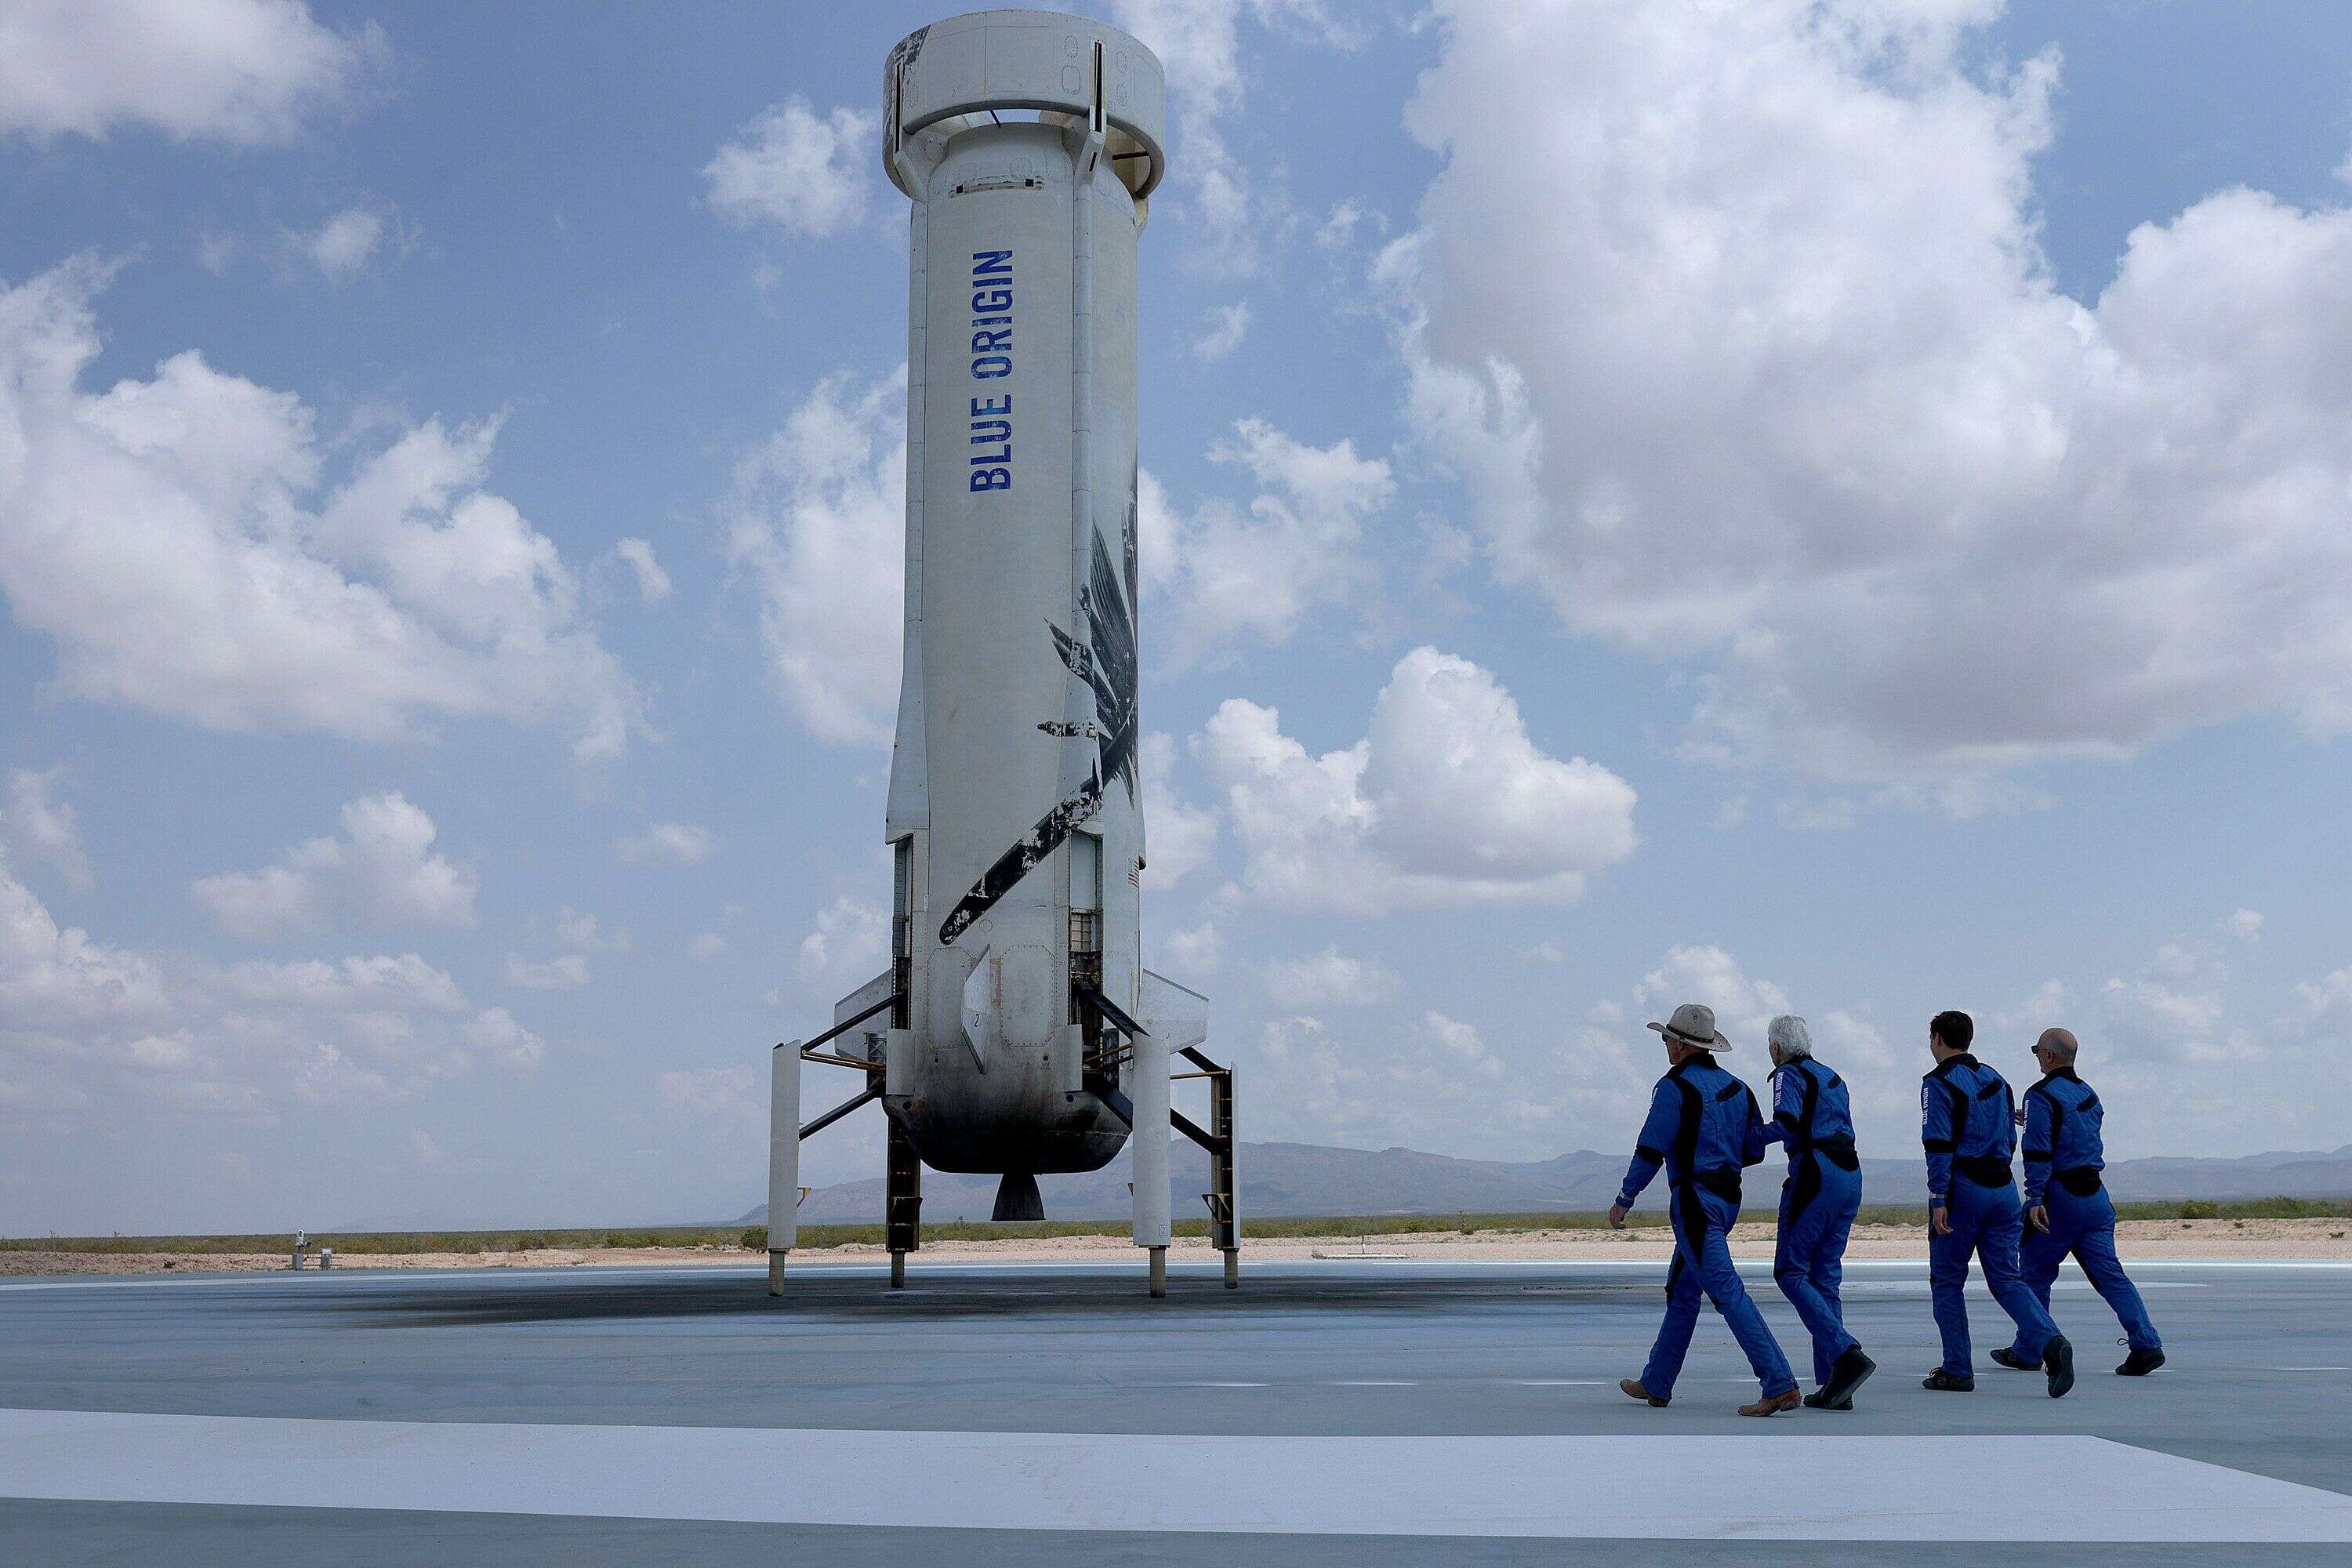 VAN HORN, TEXAS - JULY 20: Blue Origin's New Shepard crew (LR) Jeff Bezos, Wally Funk, Oliver Daemen, and Mark Bezos walk near the booster to pose for a picture after flying into space in the Blue Origin New Shepard rocket on July 20, 2021 in Van Horn, Texas.  Mr. Bezos and the crew were the first human spaceflight for the company.  (Photo by Joe Raedle/Getty Images)